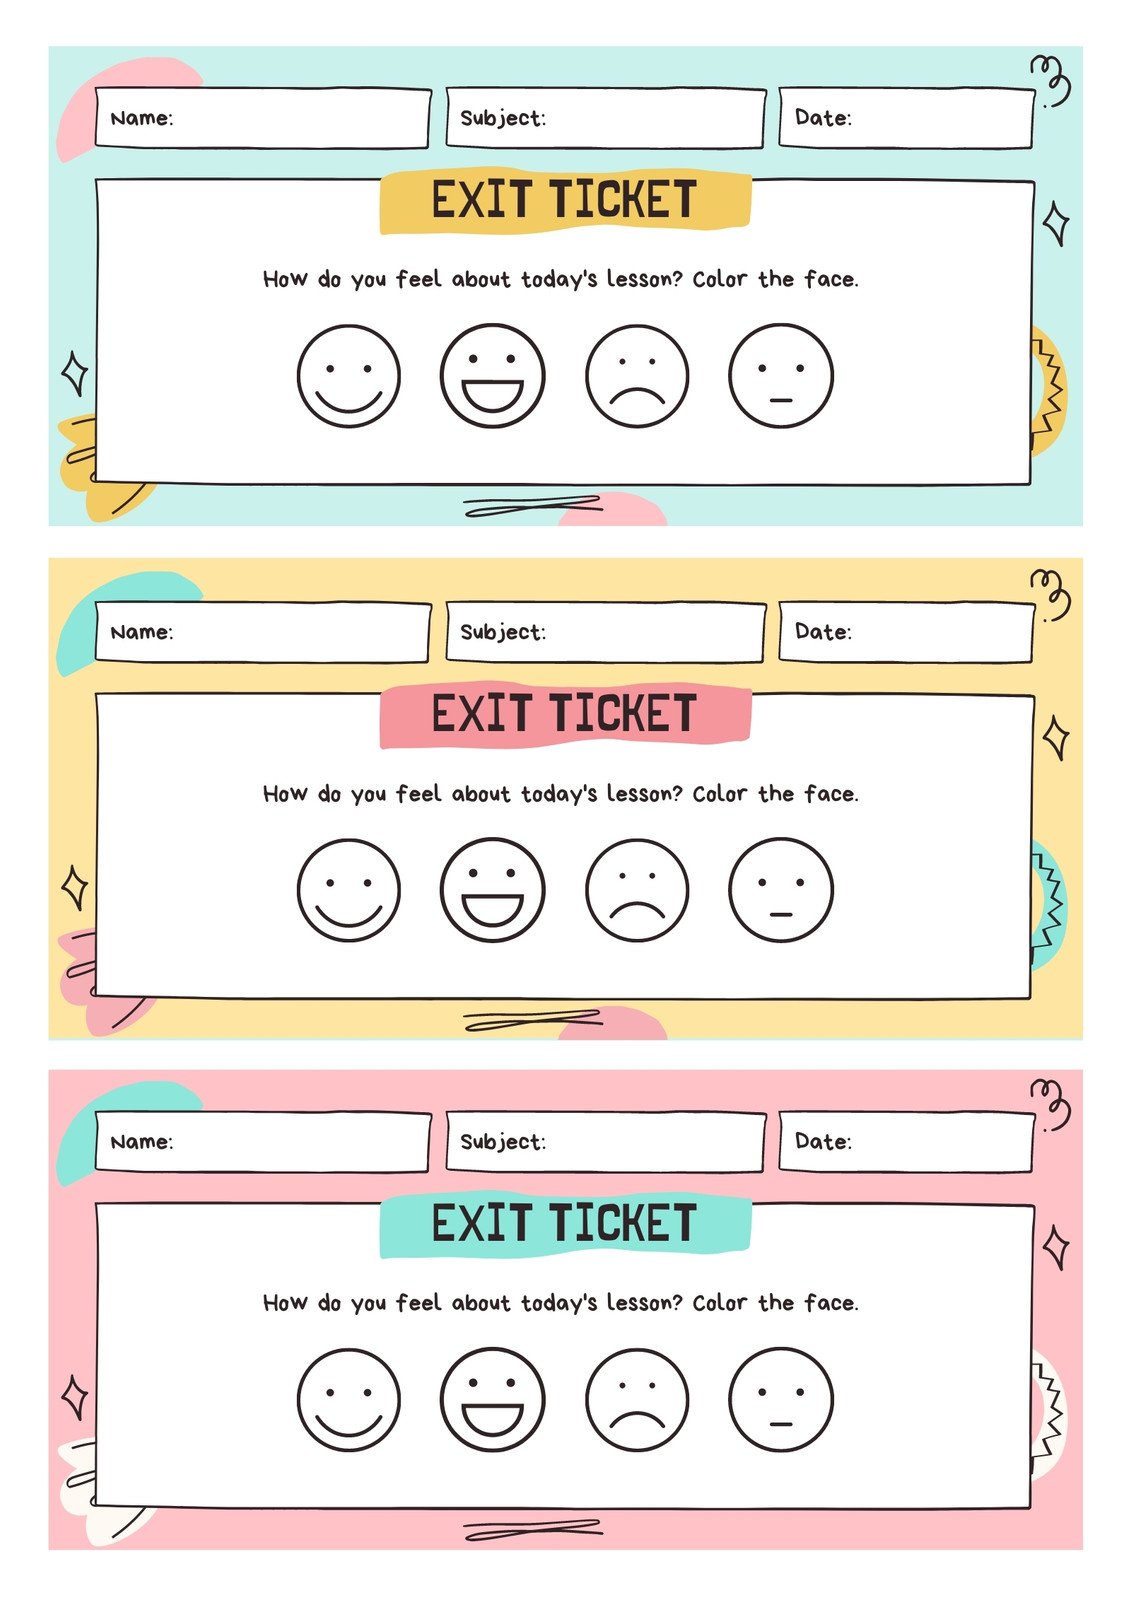 printable-editable-exit-ticket-template